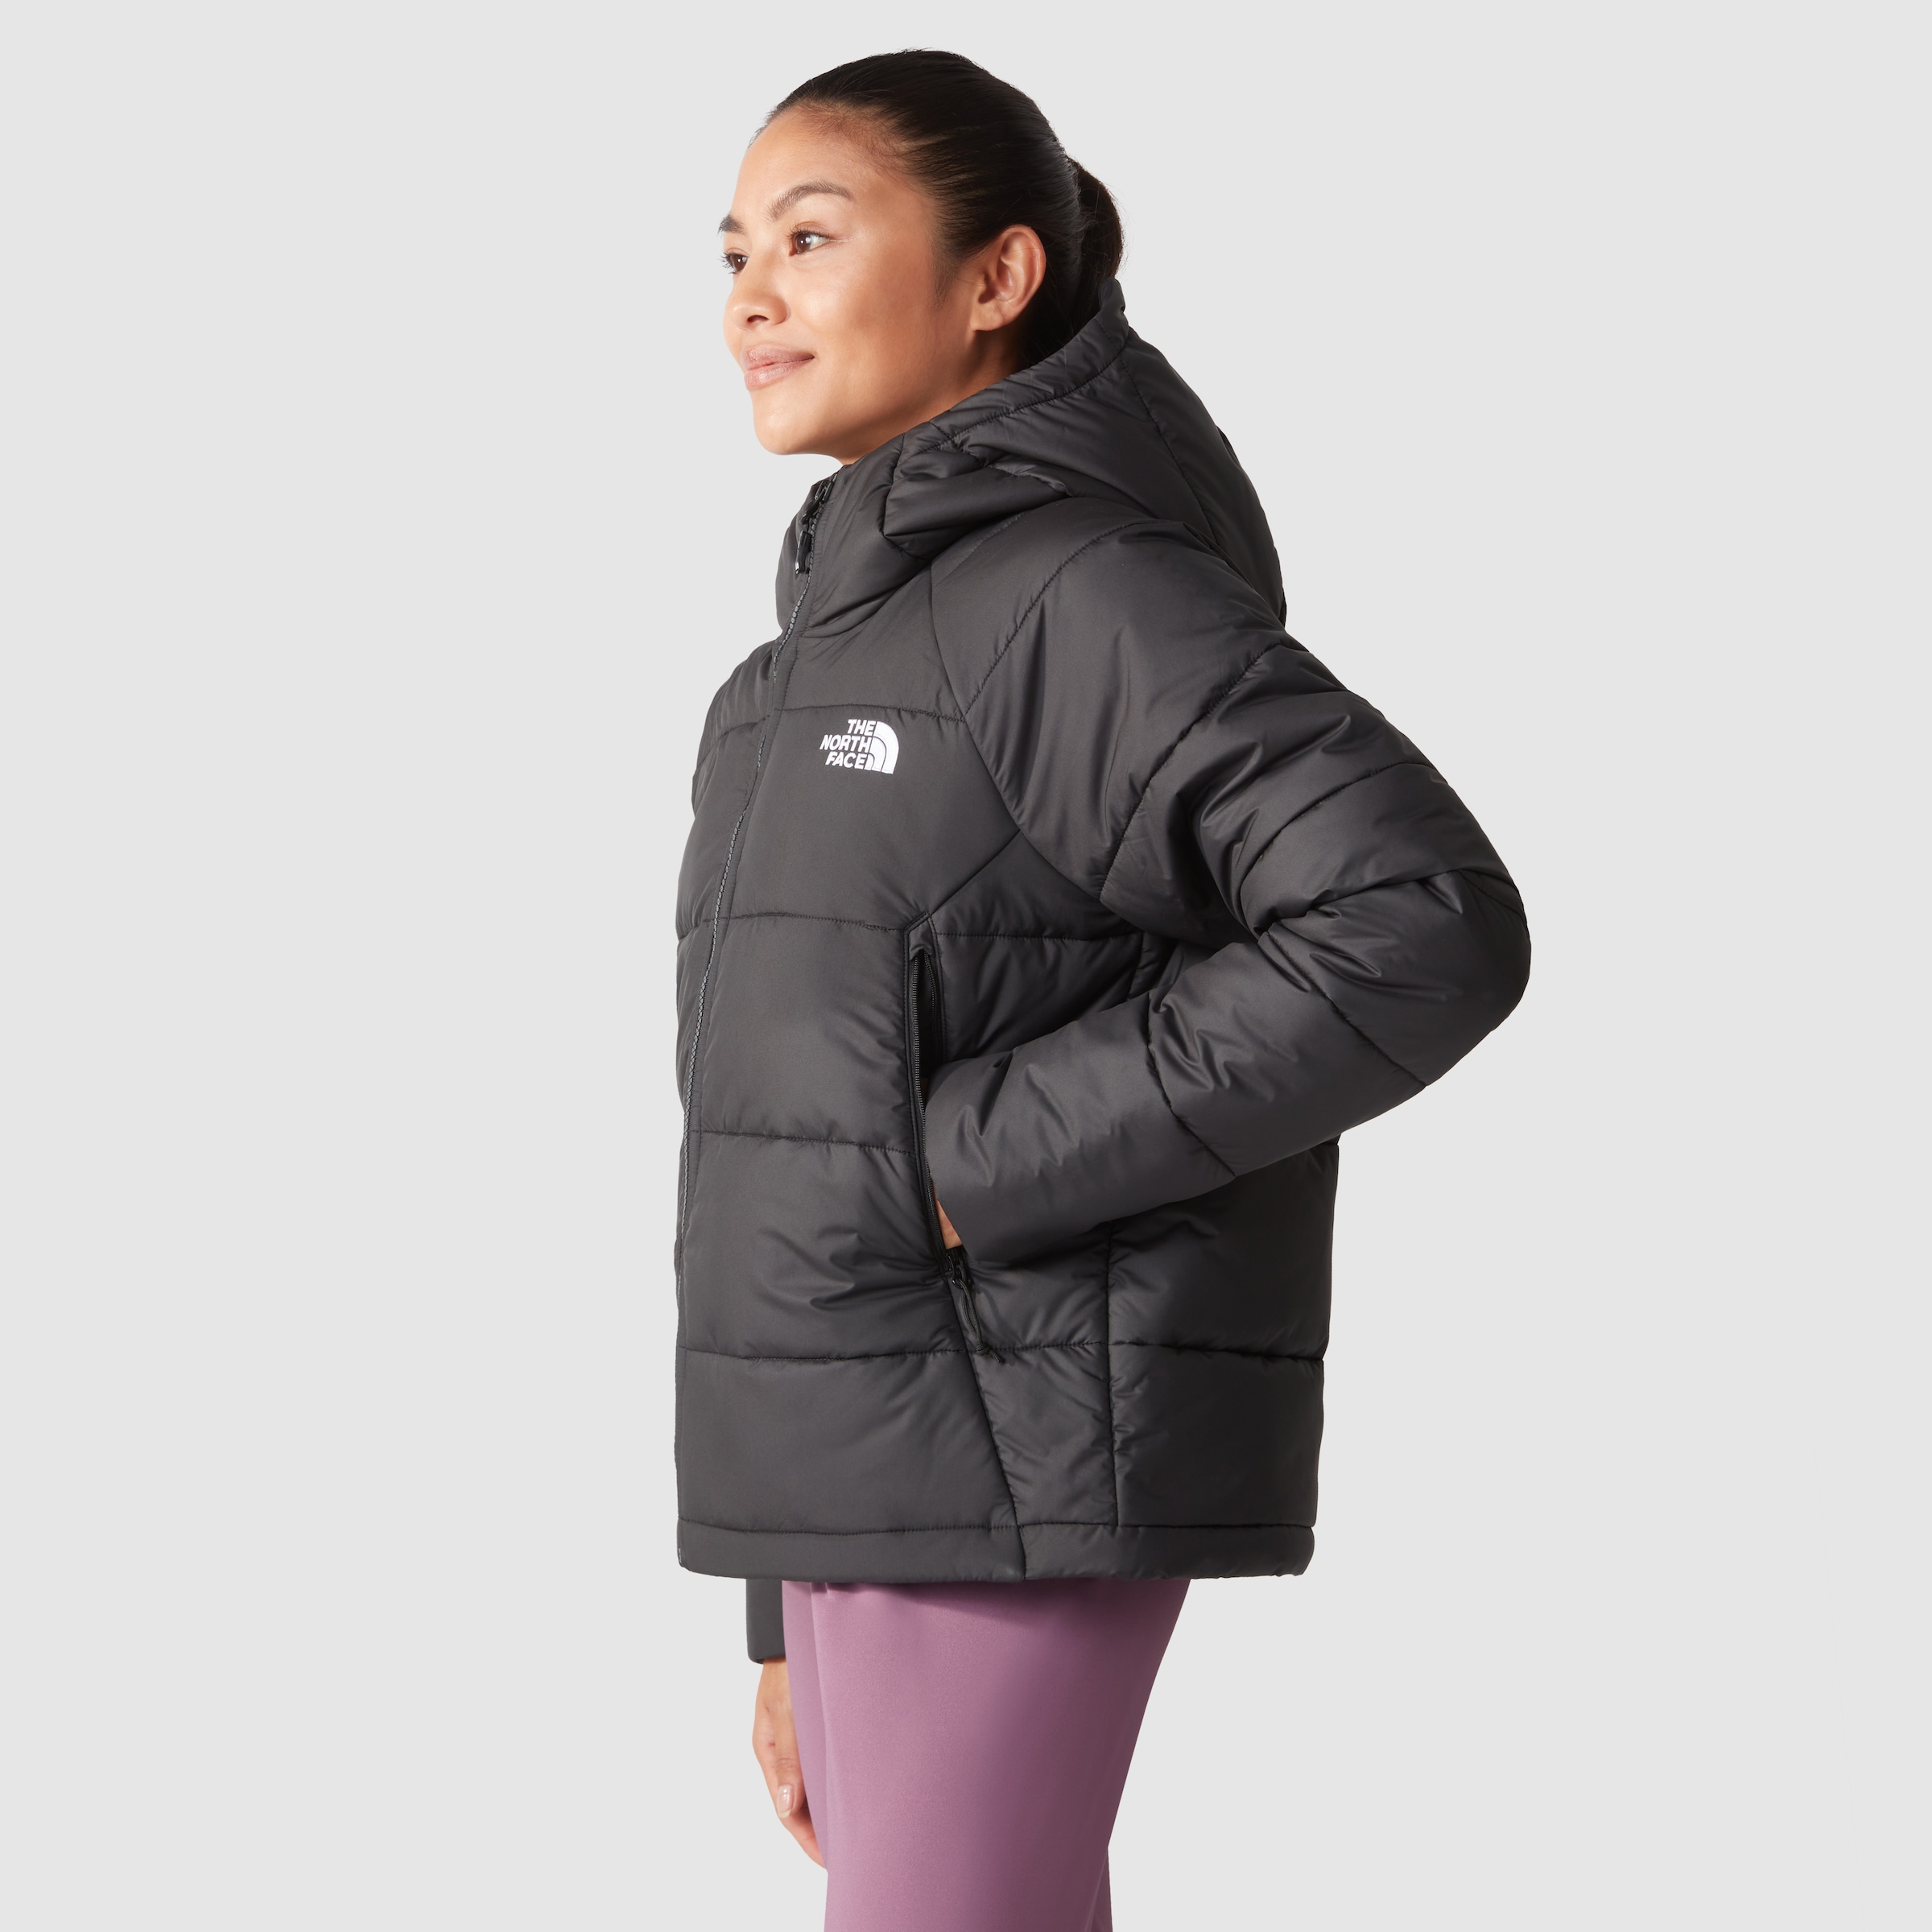 The North Face Funktionsjacke »W mit Logodruck Kapuze, BAUR HYALITE mit | HOODIE«, SYNTHETIC